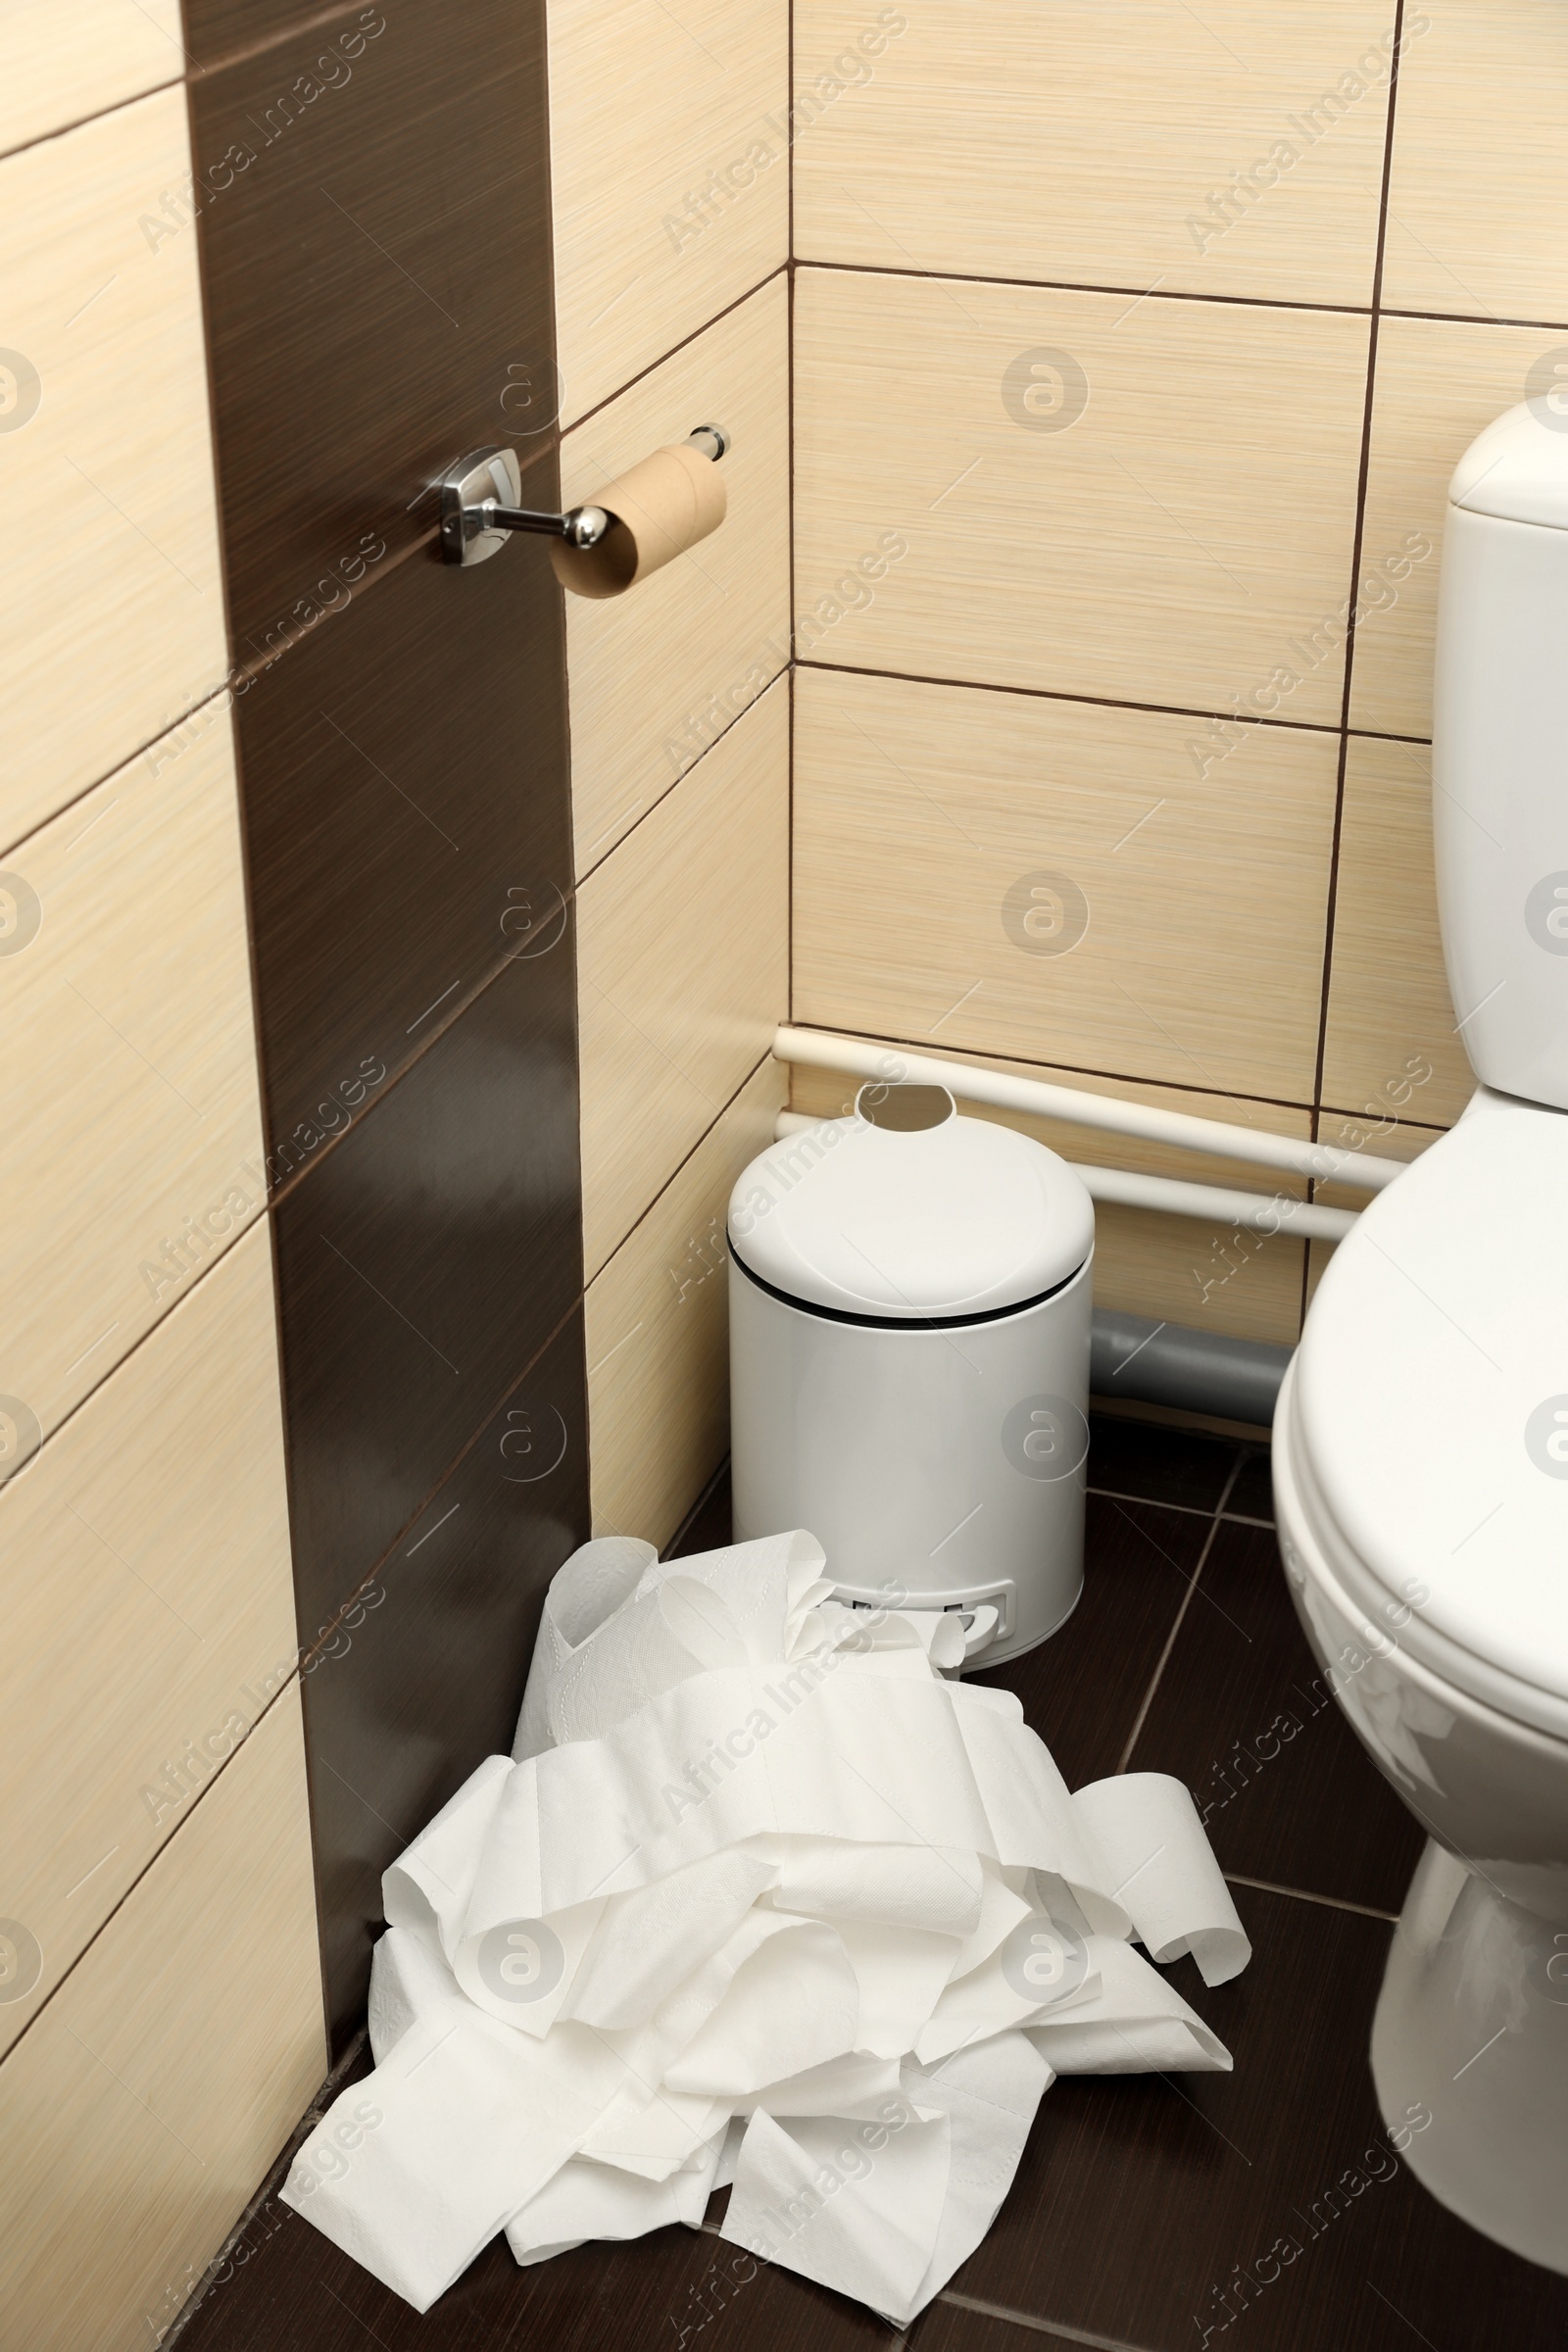 Photo of Soft toilet paper unrolled from holder on floor in bathroom